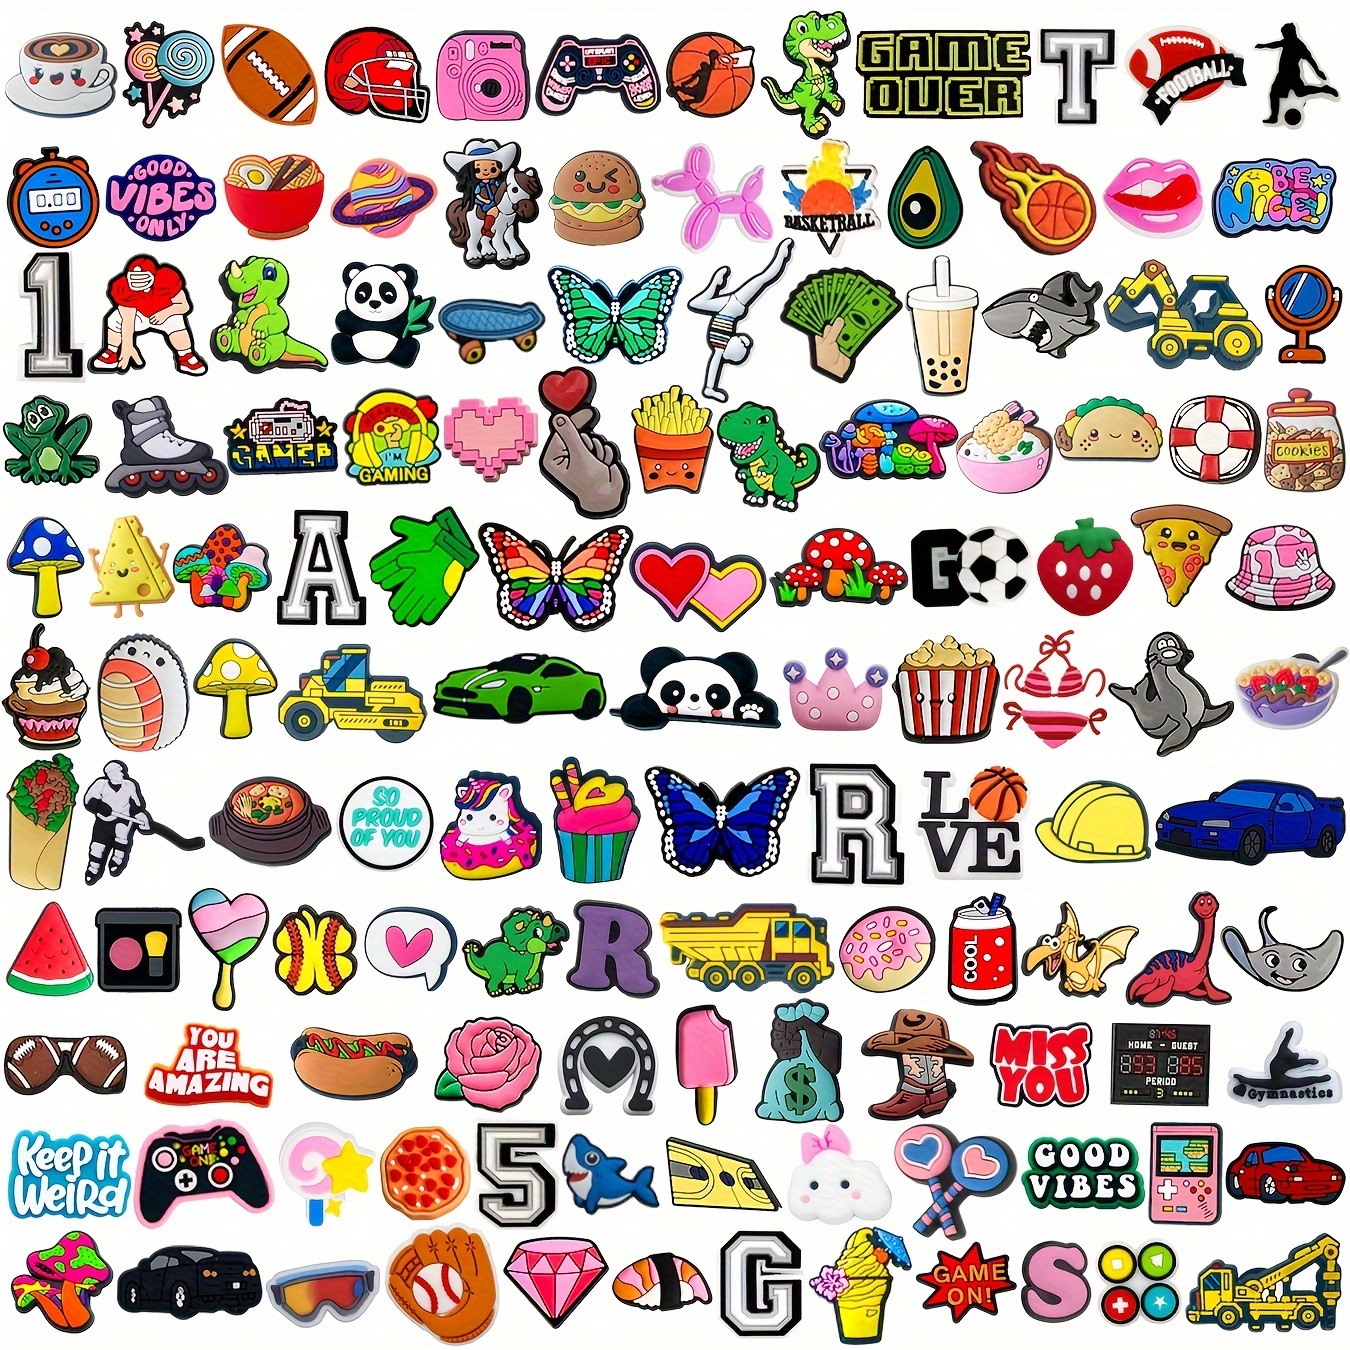  26 40Pcs Summer Shoe Charms for Clog Sandals Bracelets  Decoration,Beach Charms for Kids Teens Adults Girls Boys Men Women Party  Favor (26) : Clothing, Shoes & Jewelry